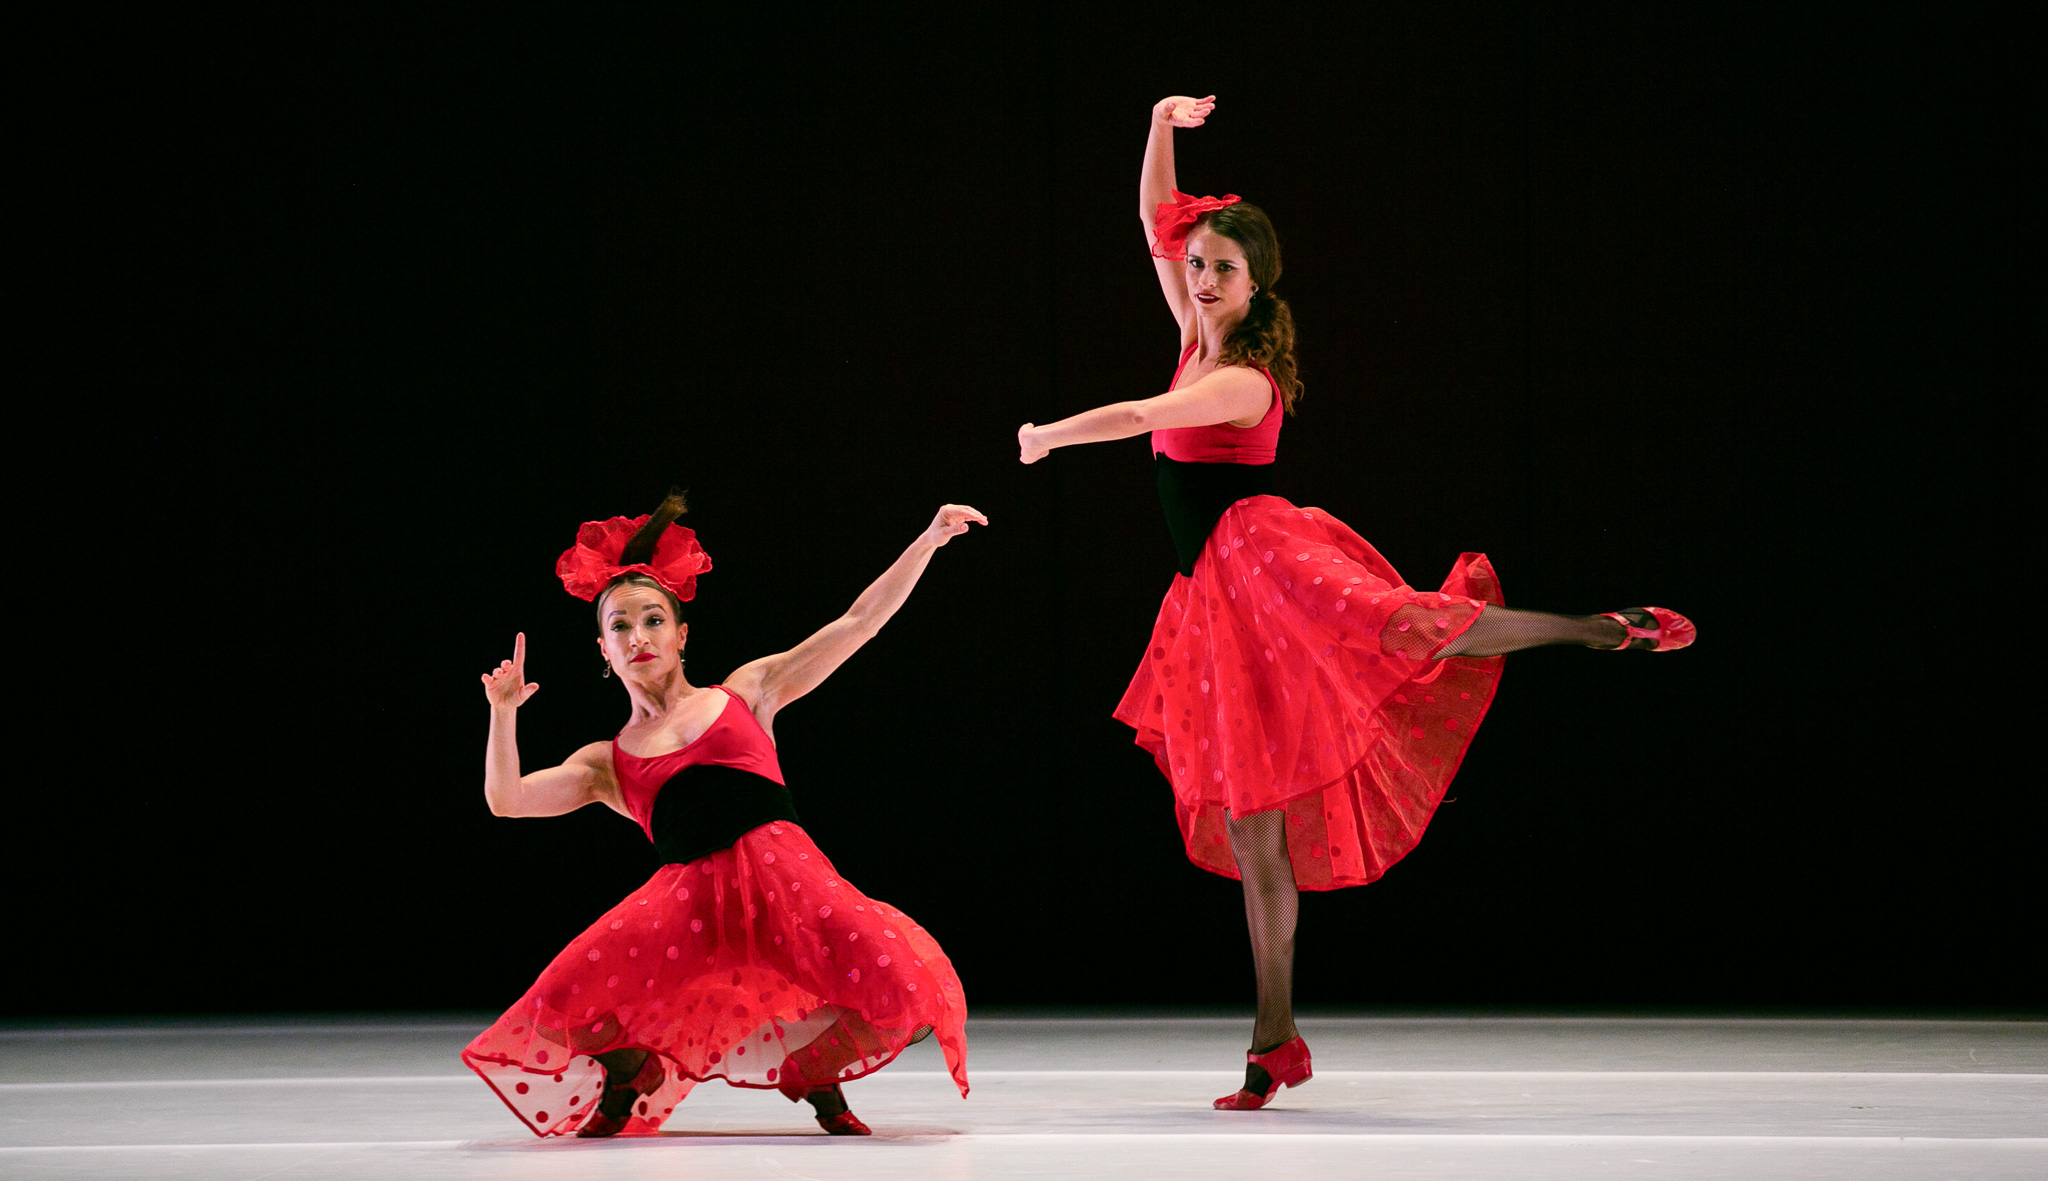 Dancers Lisa Borres and Maria Ambrose from the Paul Taylor Dance Company in red dress costumes dancing on stage.